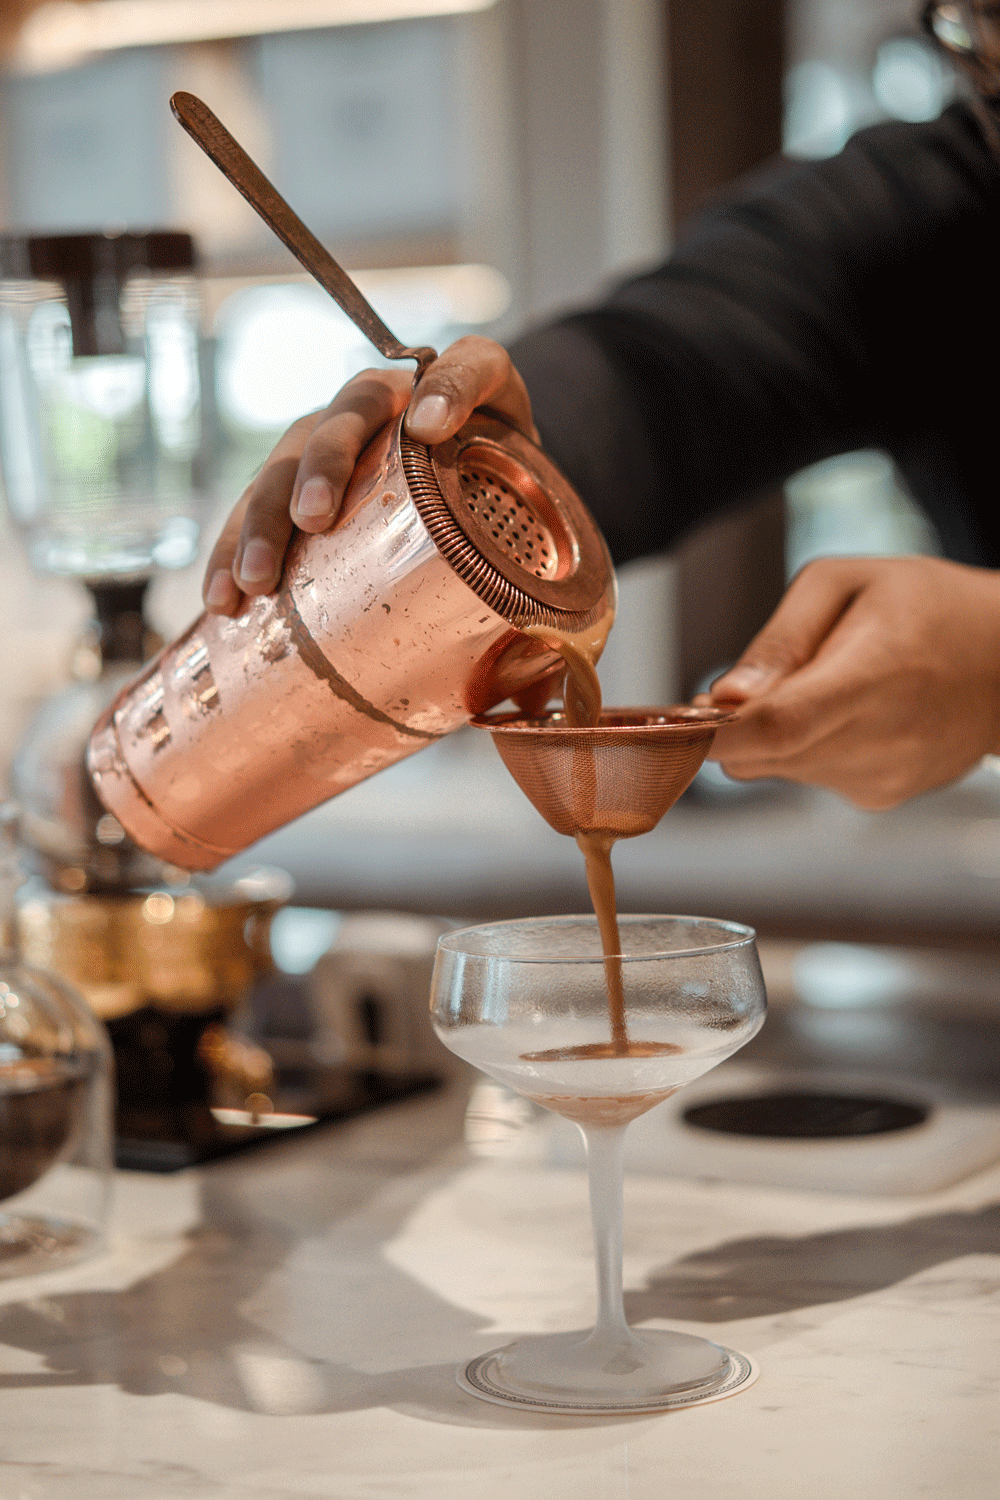 coffee being poured at Singapore Coffee in Raffles Hotel, Photography by Melissa C Koh | melissackoh.com